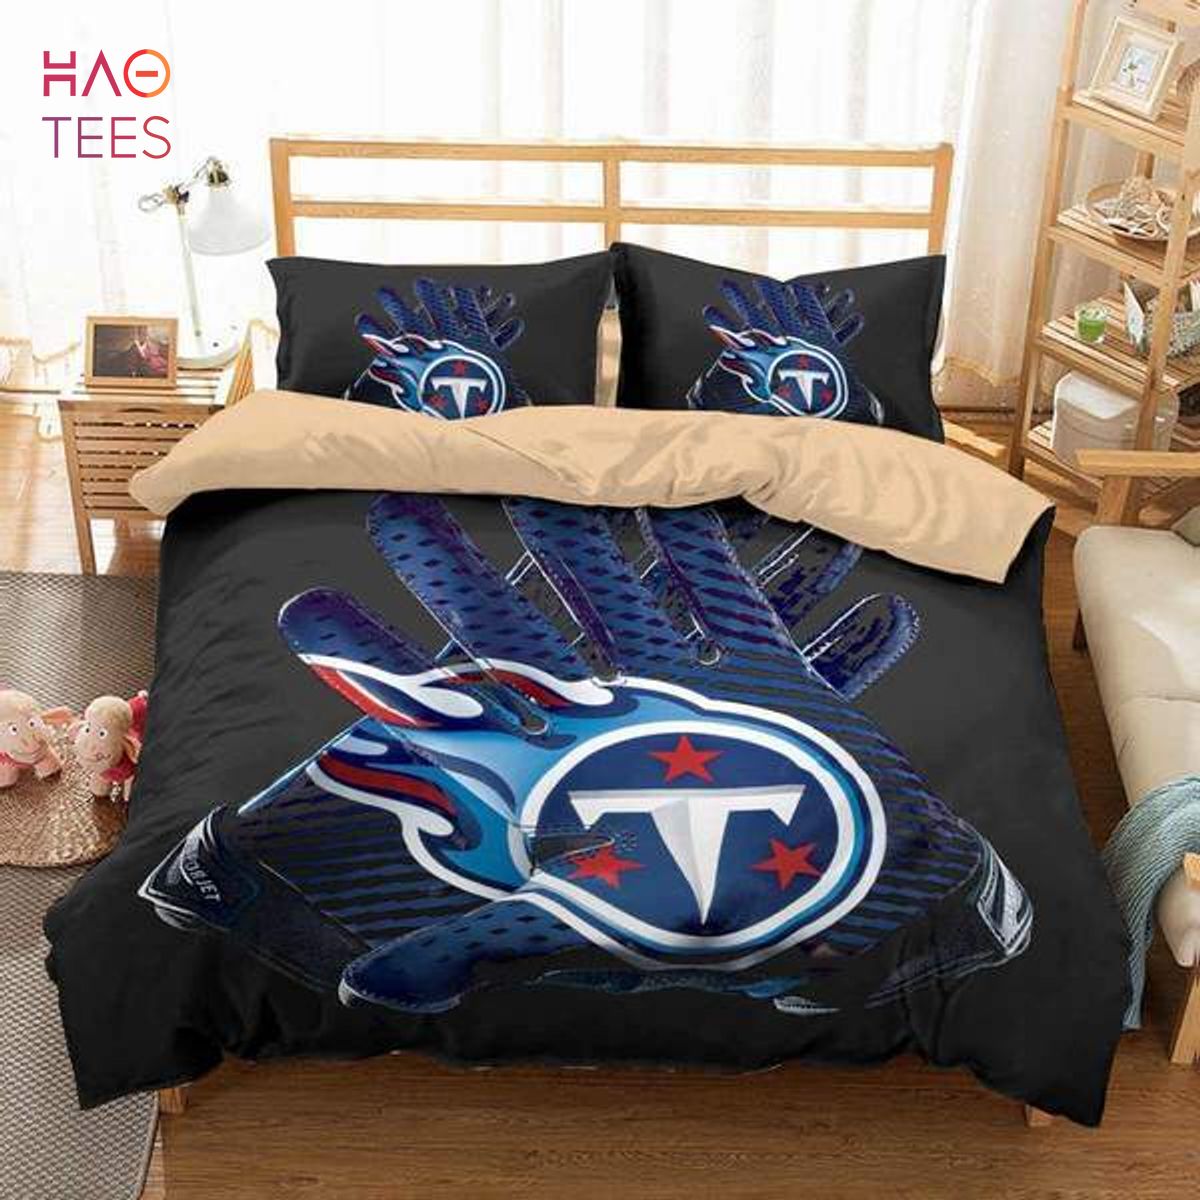 BEST Tennessee Titans Duvet Cover and Pillowcase Set Bedding Set